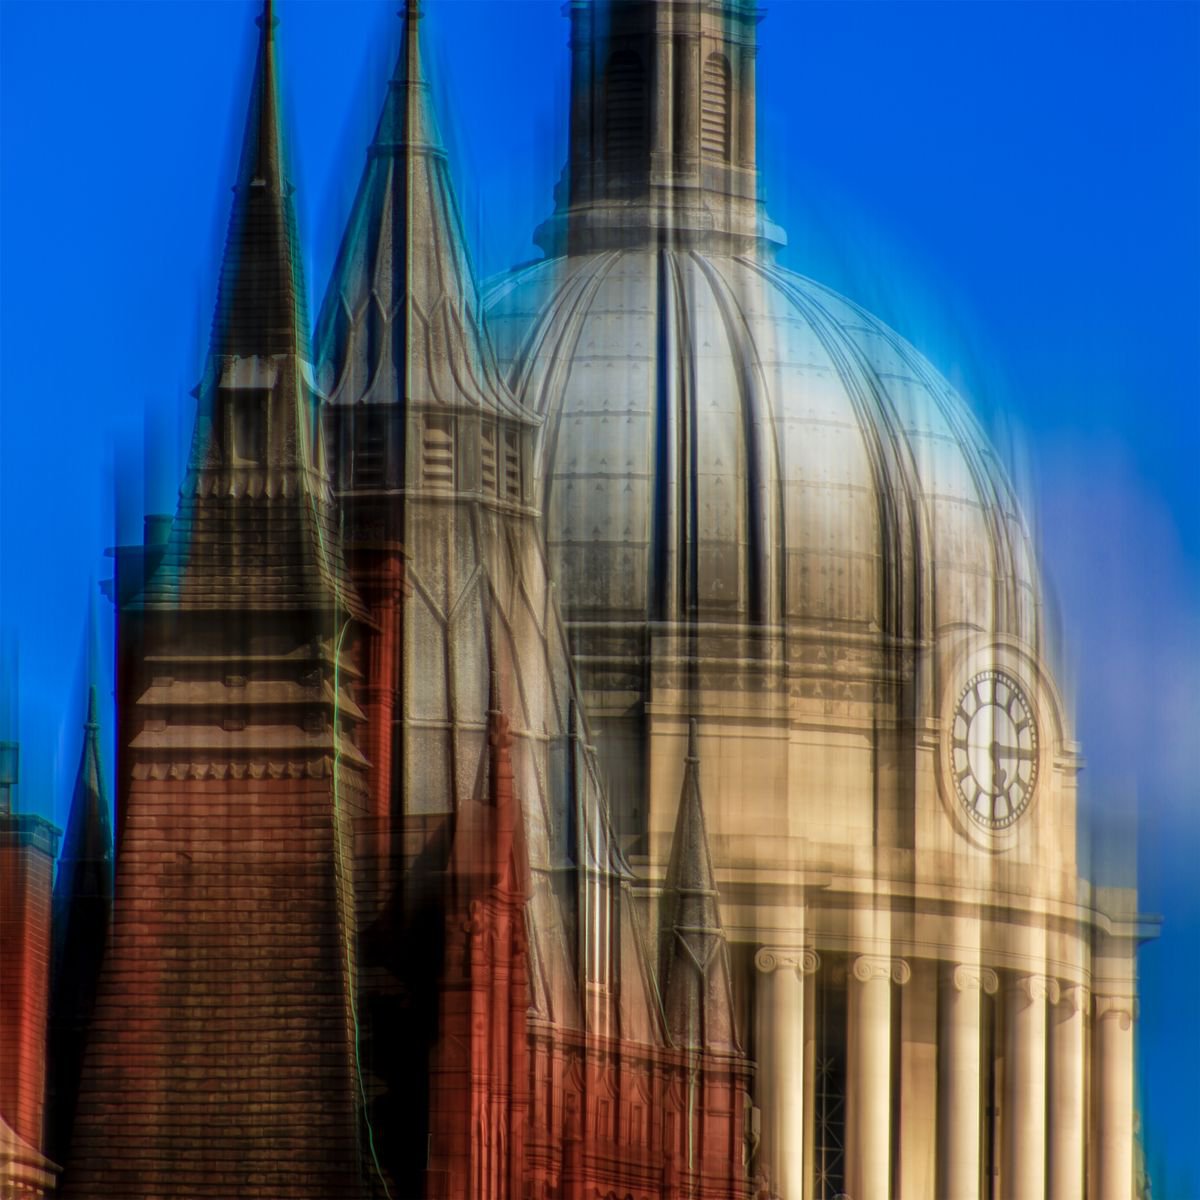 Dome and Spires Limited Edition 1/50 10x10 inch Photographic Print. by Graham Briggs